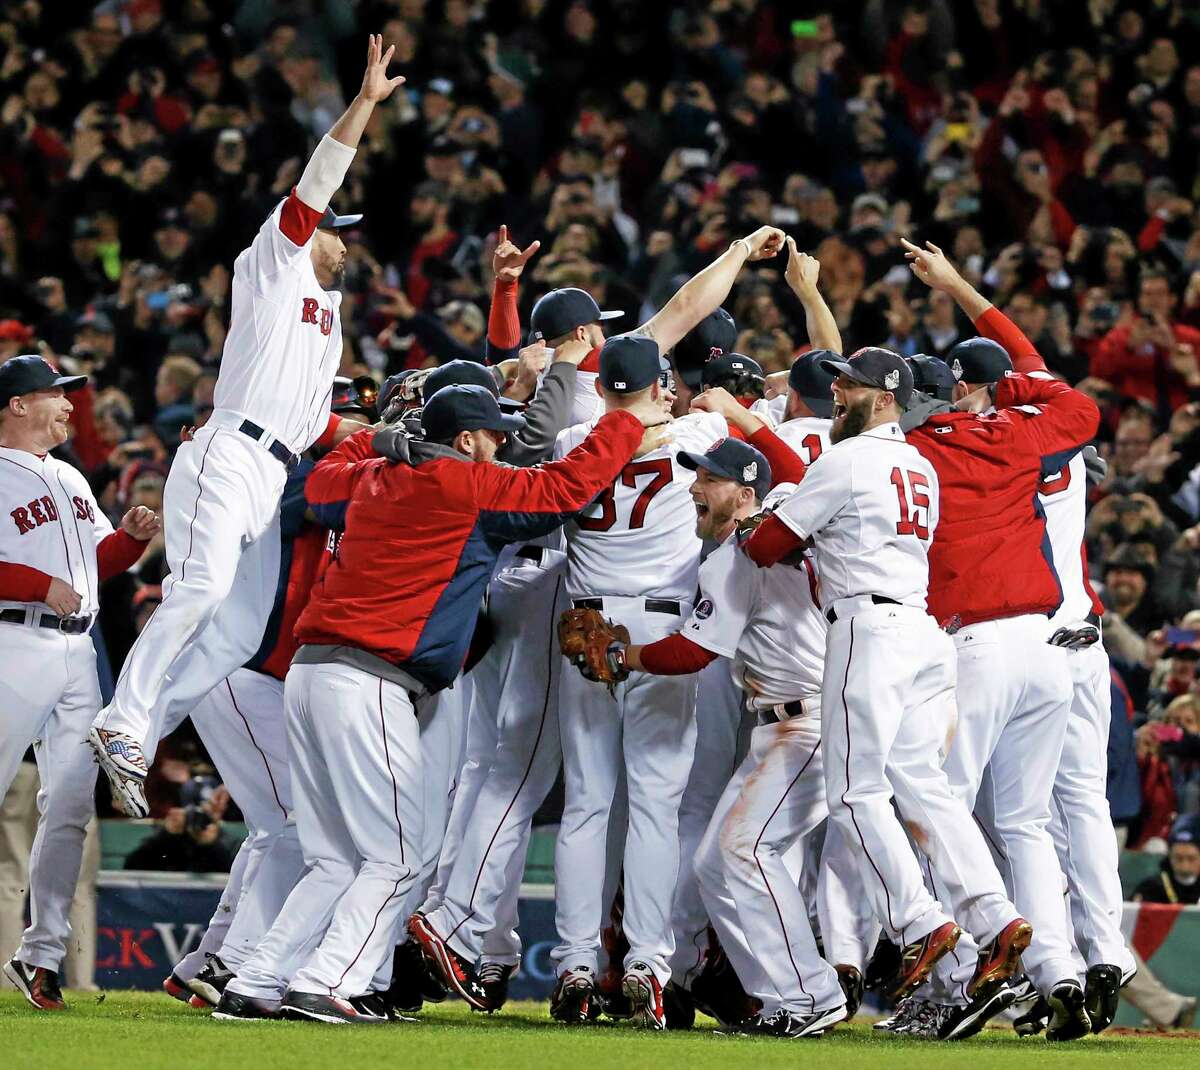 Red Sox win World Series with Game 6 victory over Cardinals